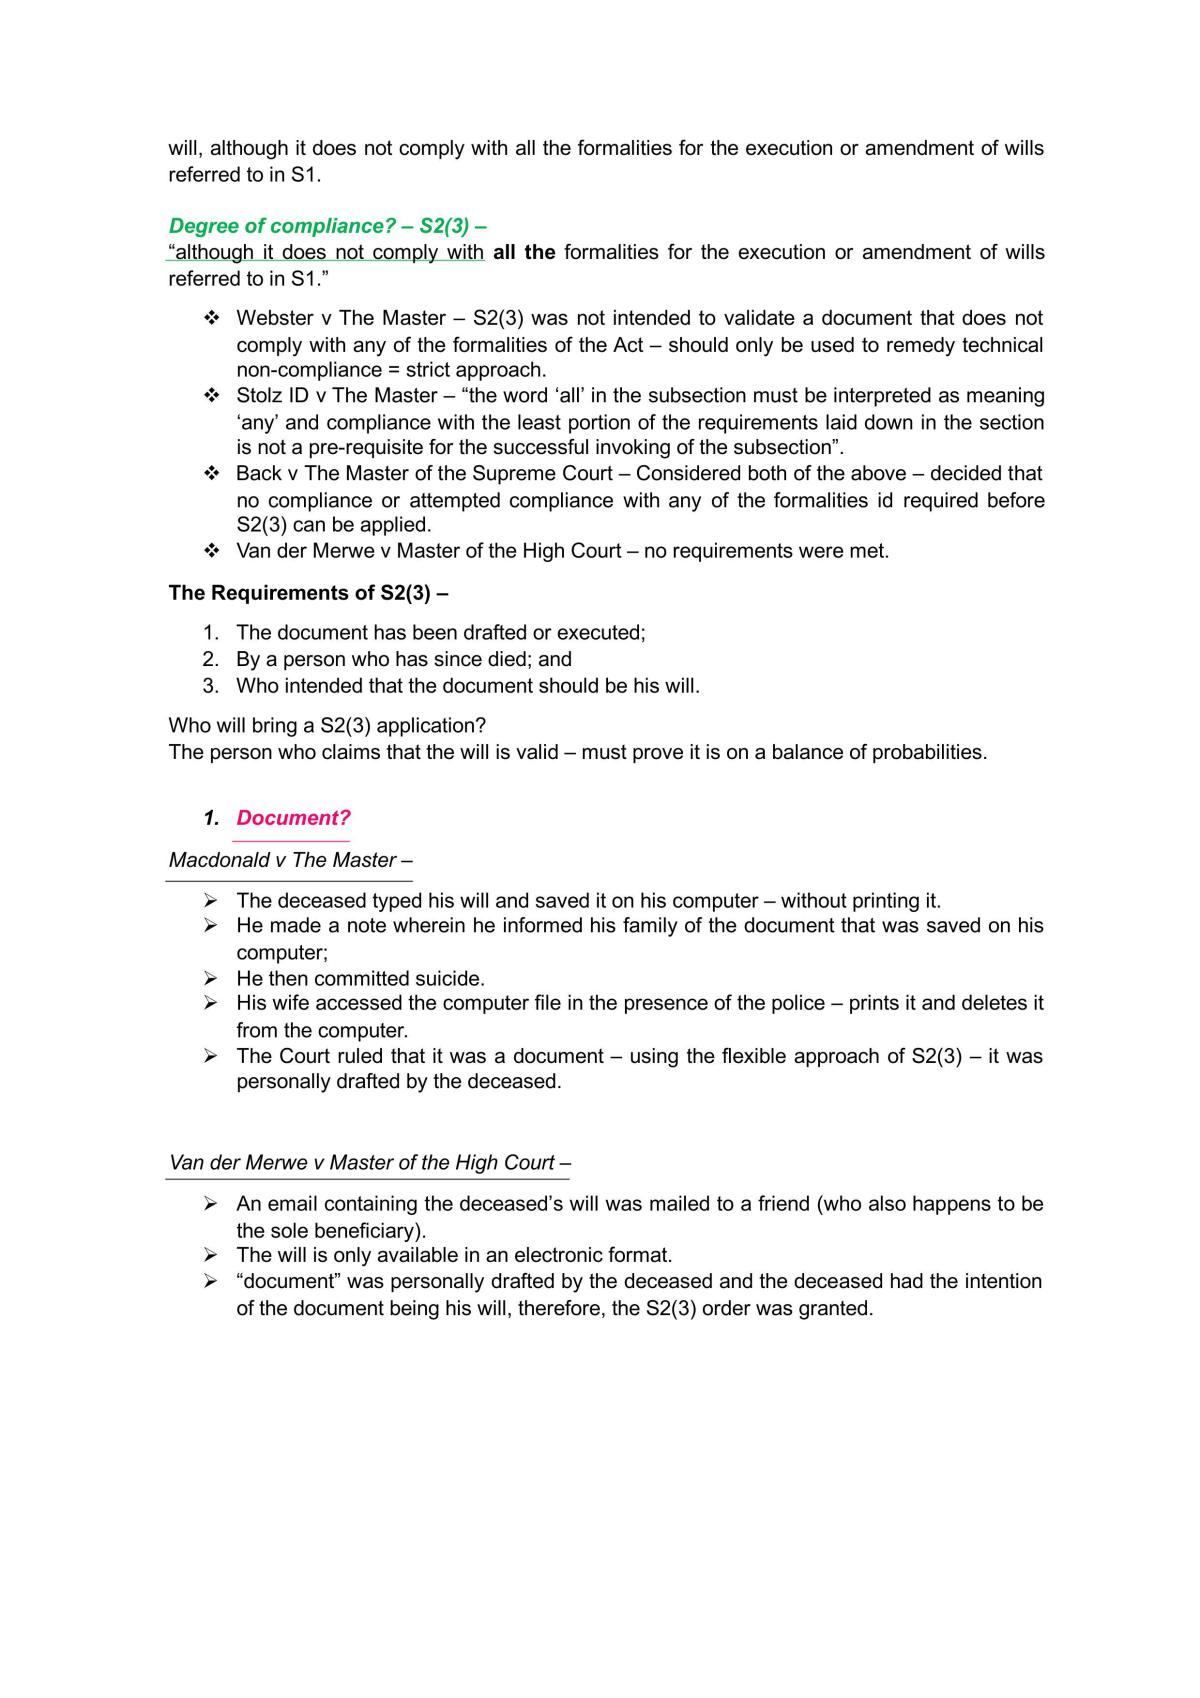 Study Notes - Law of Succession - Page 25